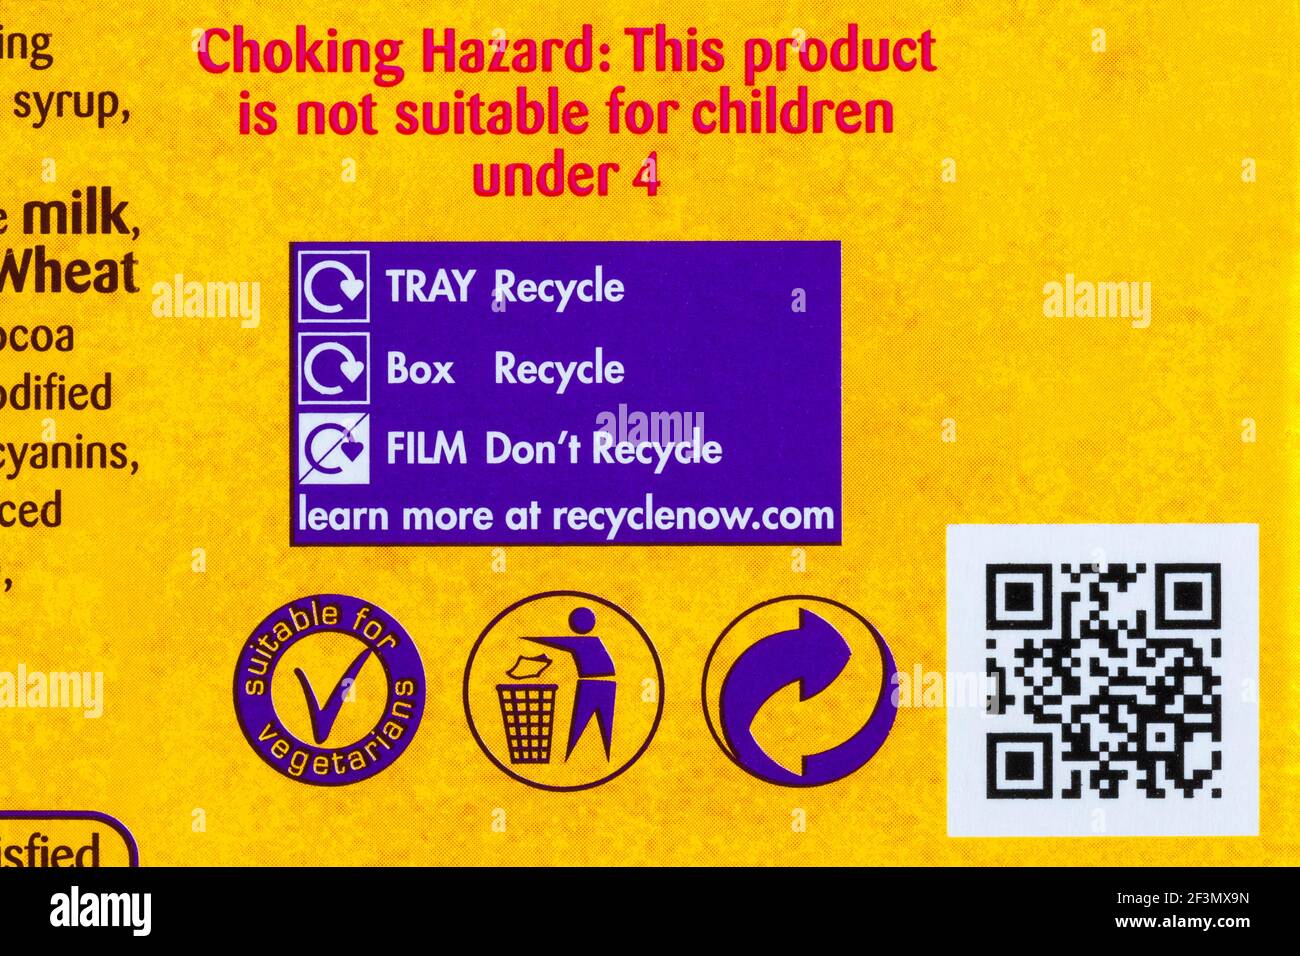 Recycling information and suitable for vegetarians symbol on box of Cadbury Mini Eggs Nest Cakes - choking hazard Stock Photo